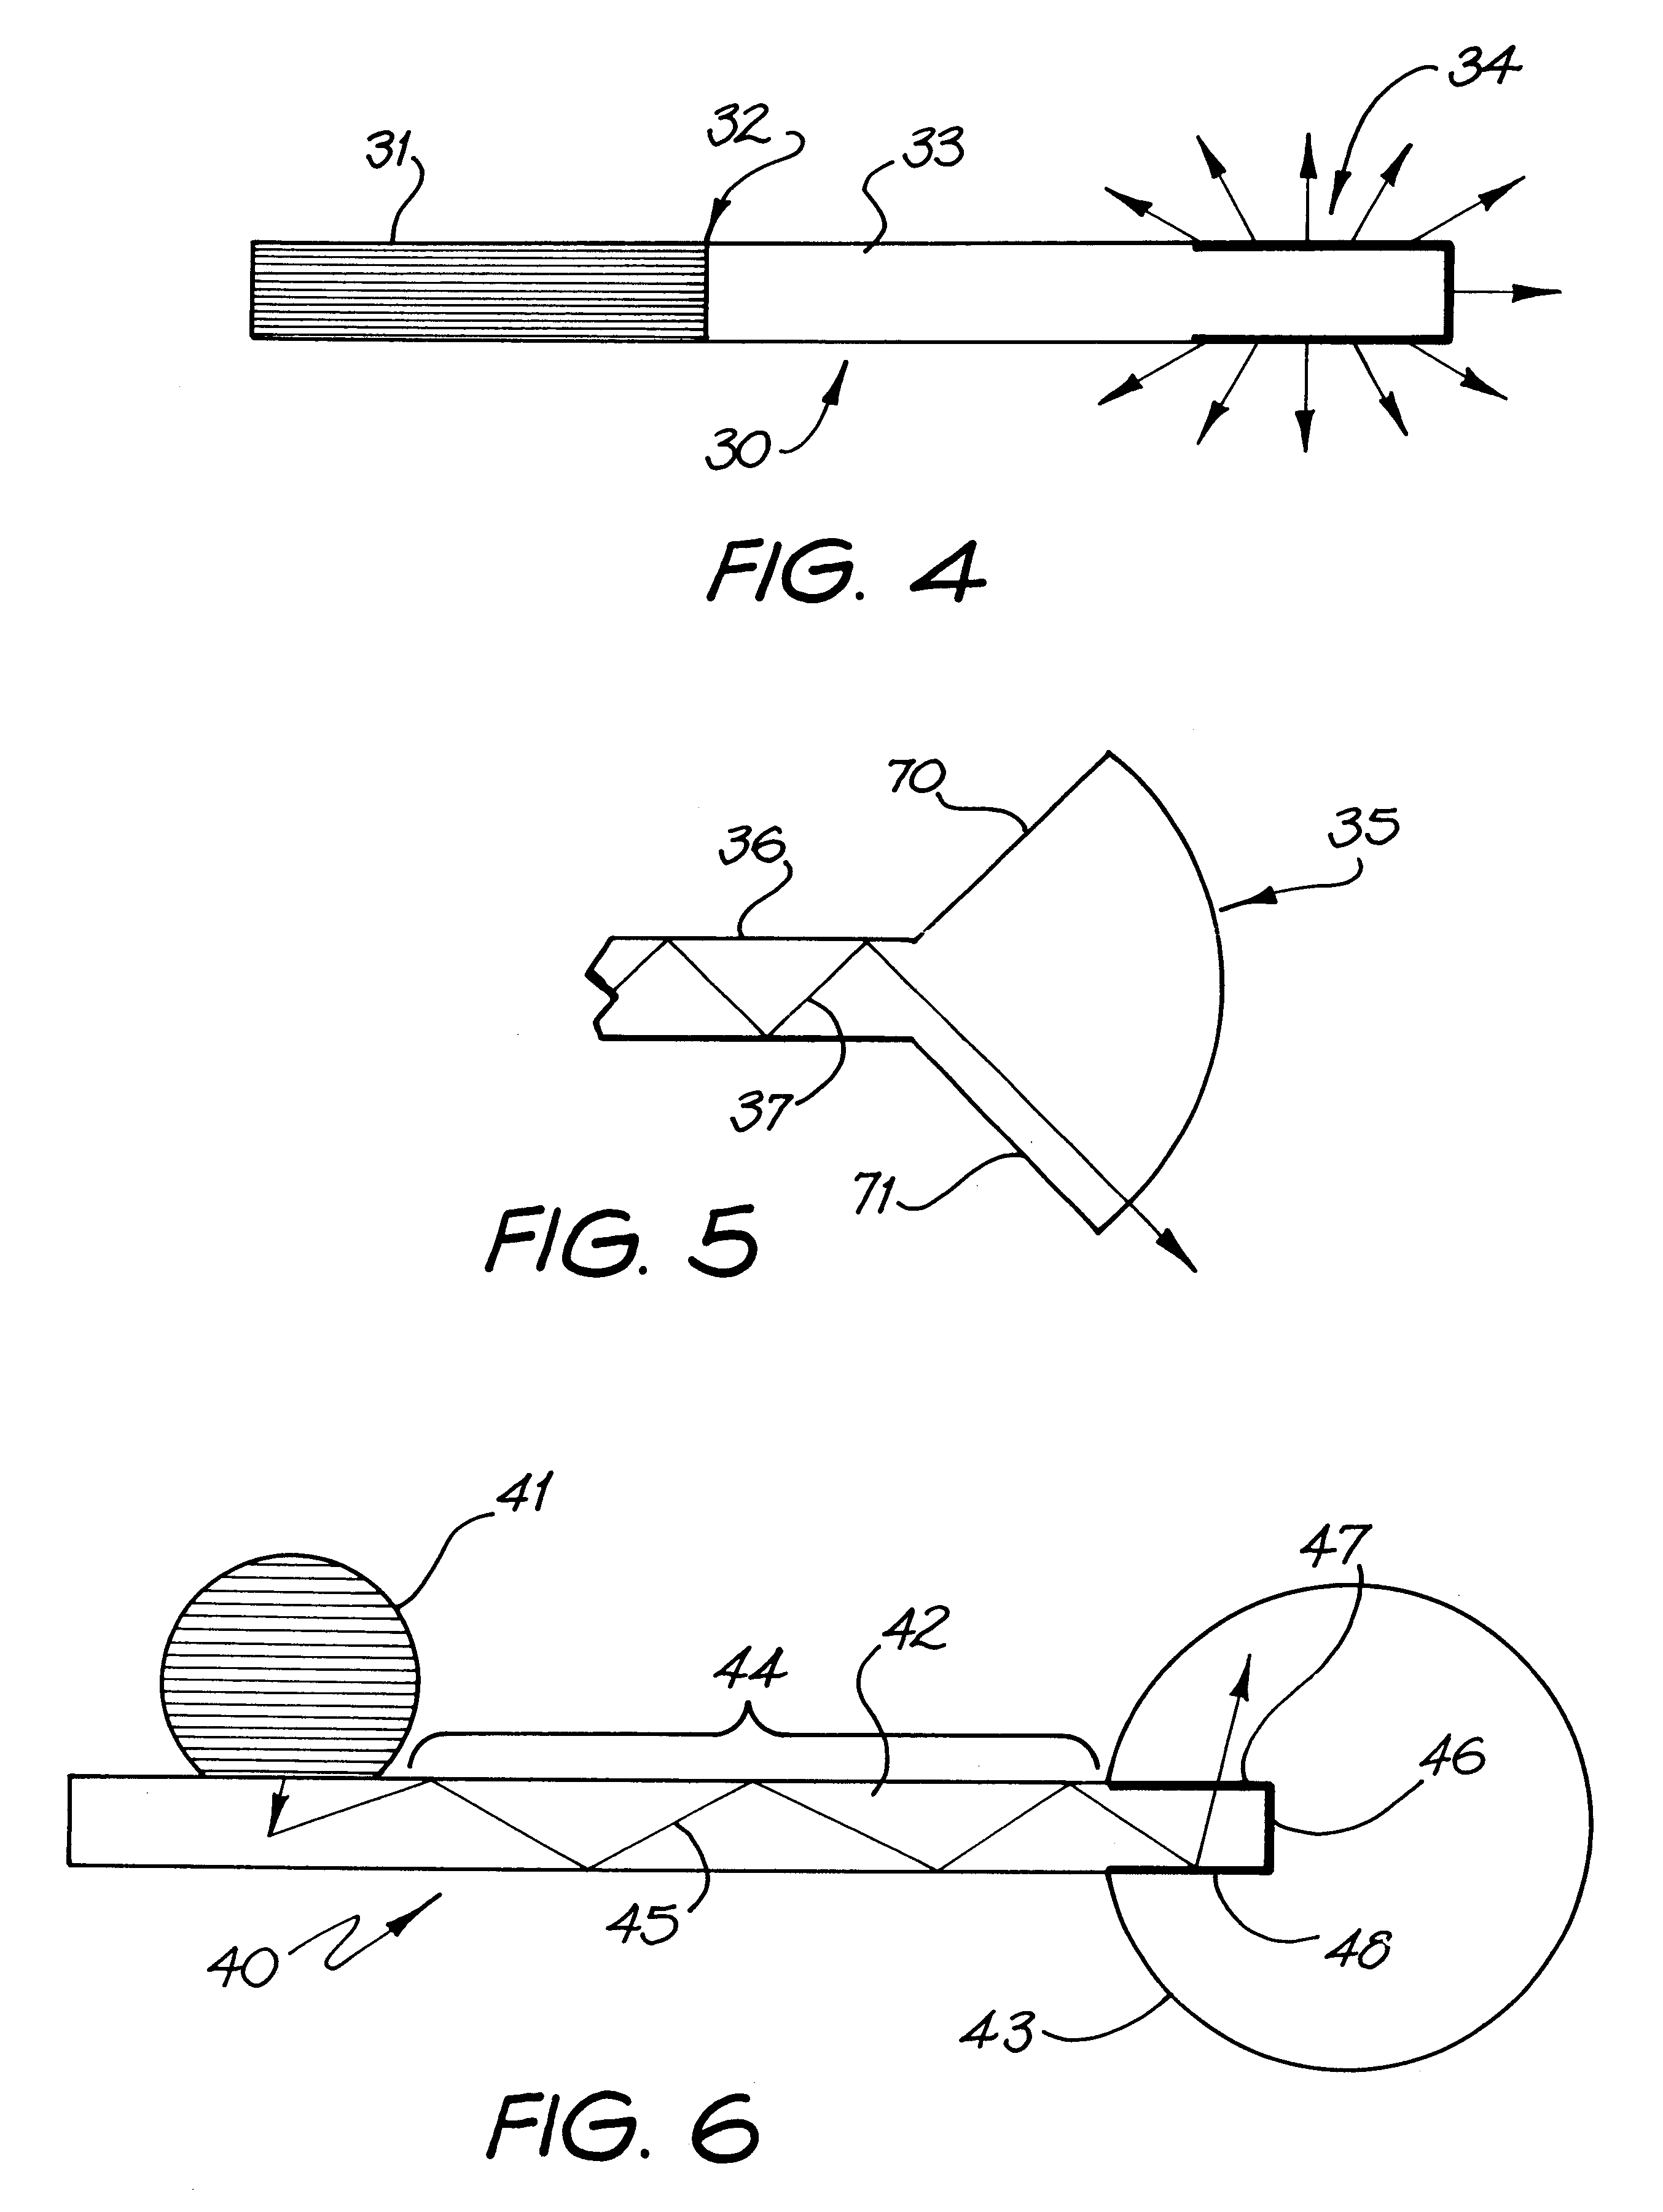 Lighting system for transmitting and releasing luminescent radiation